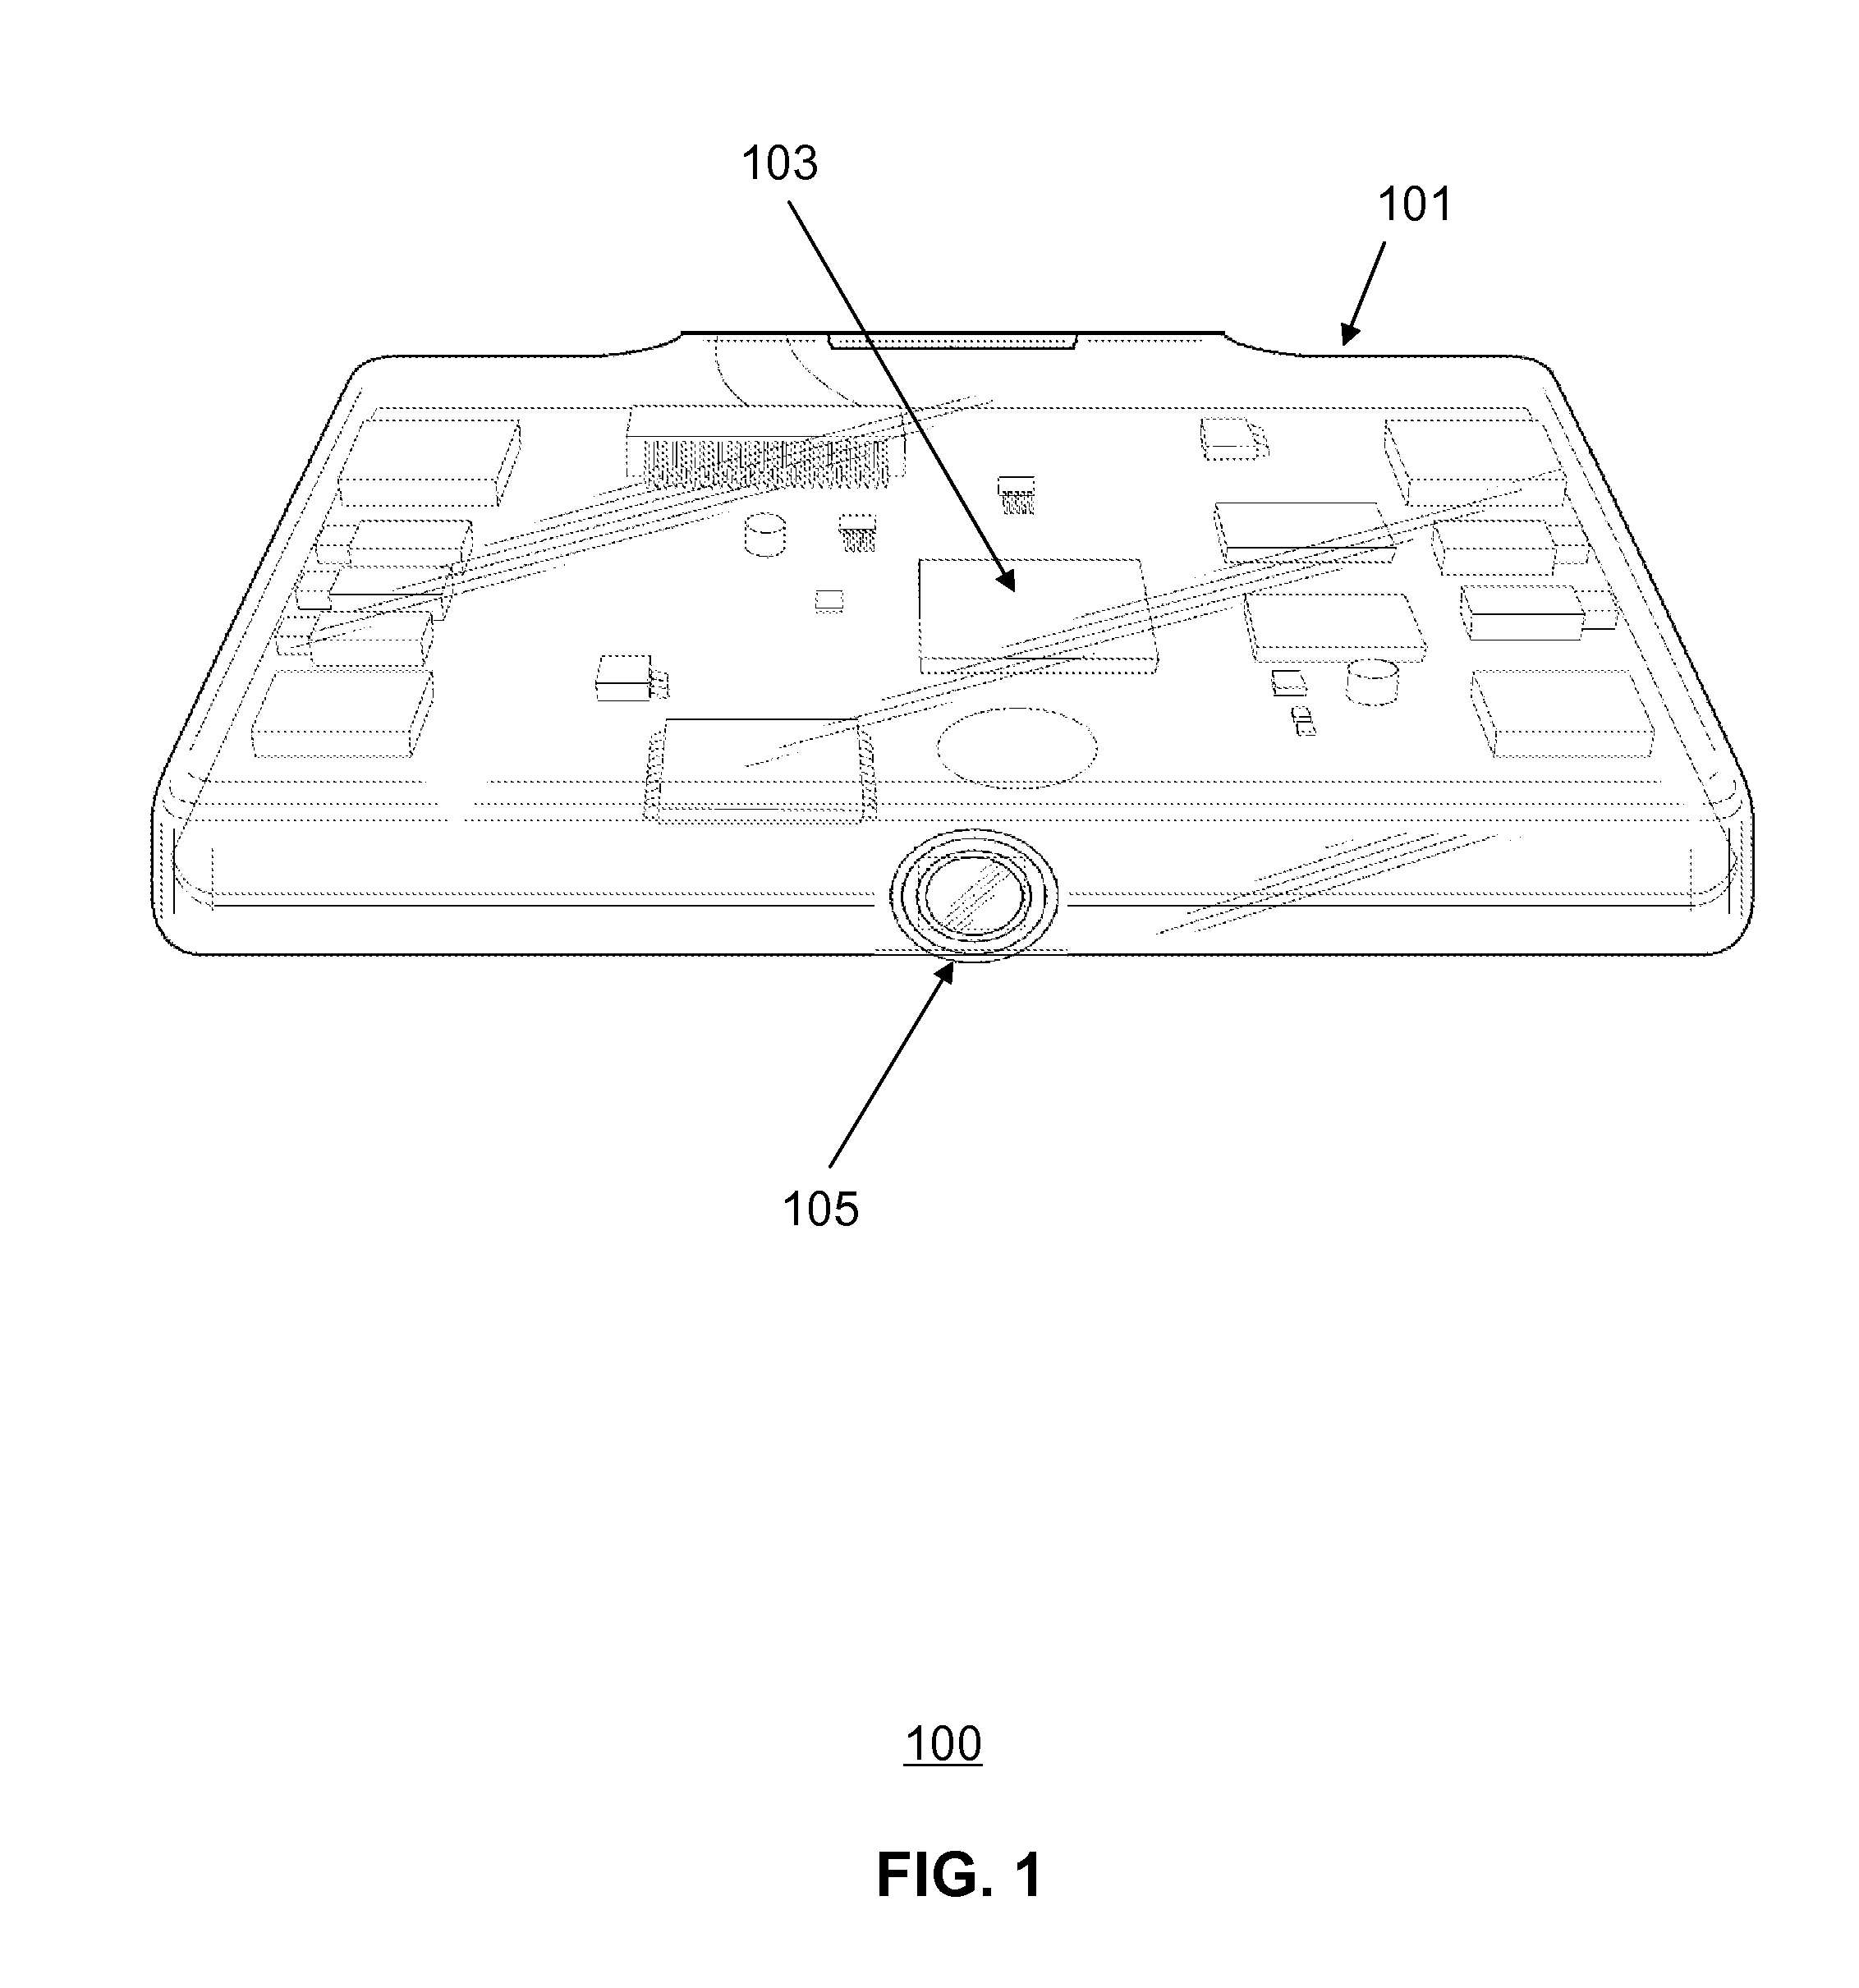 Machine-to-Machine Visual Code Generation and Recognition Method and System for Device Communications